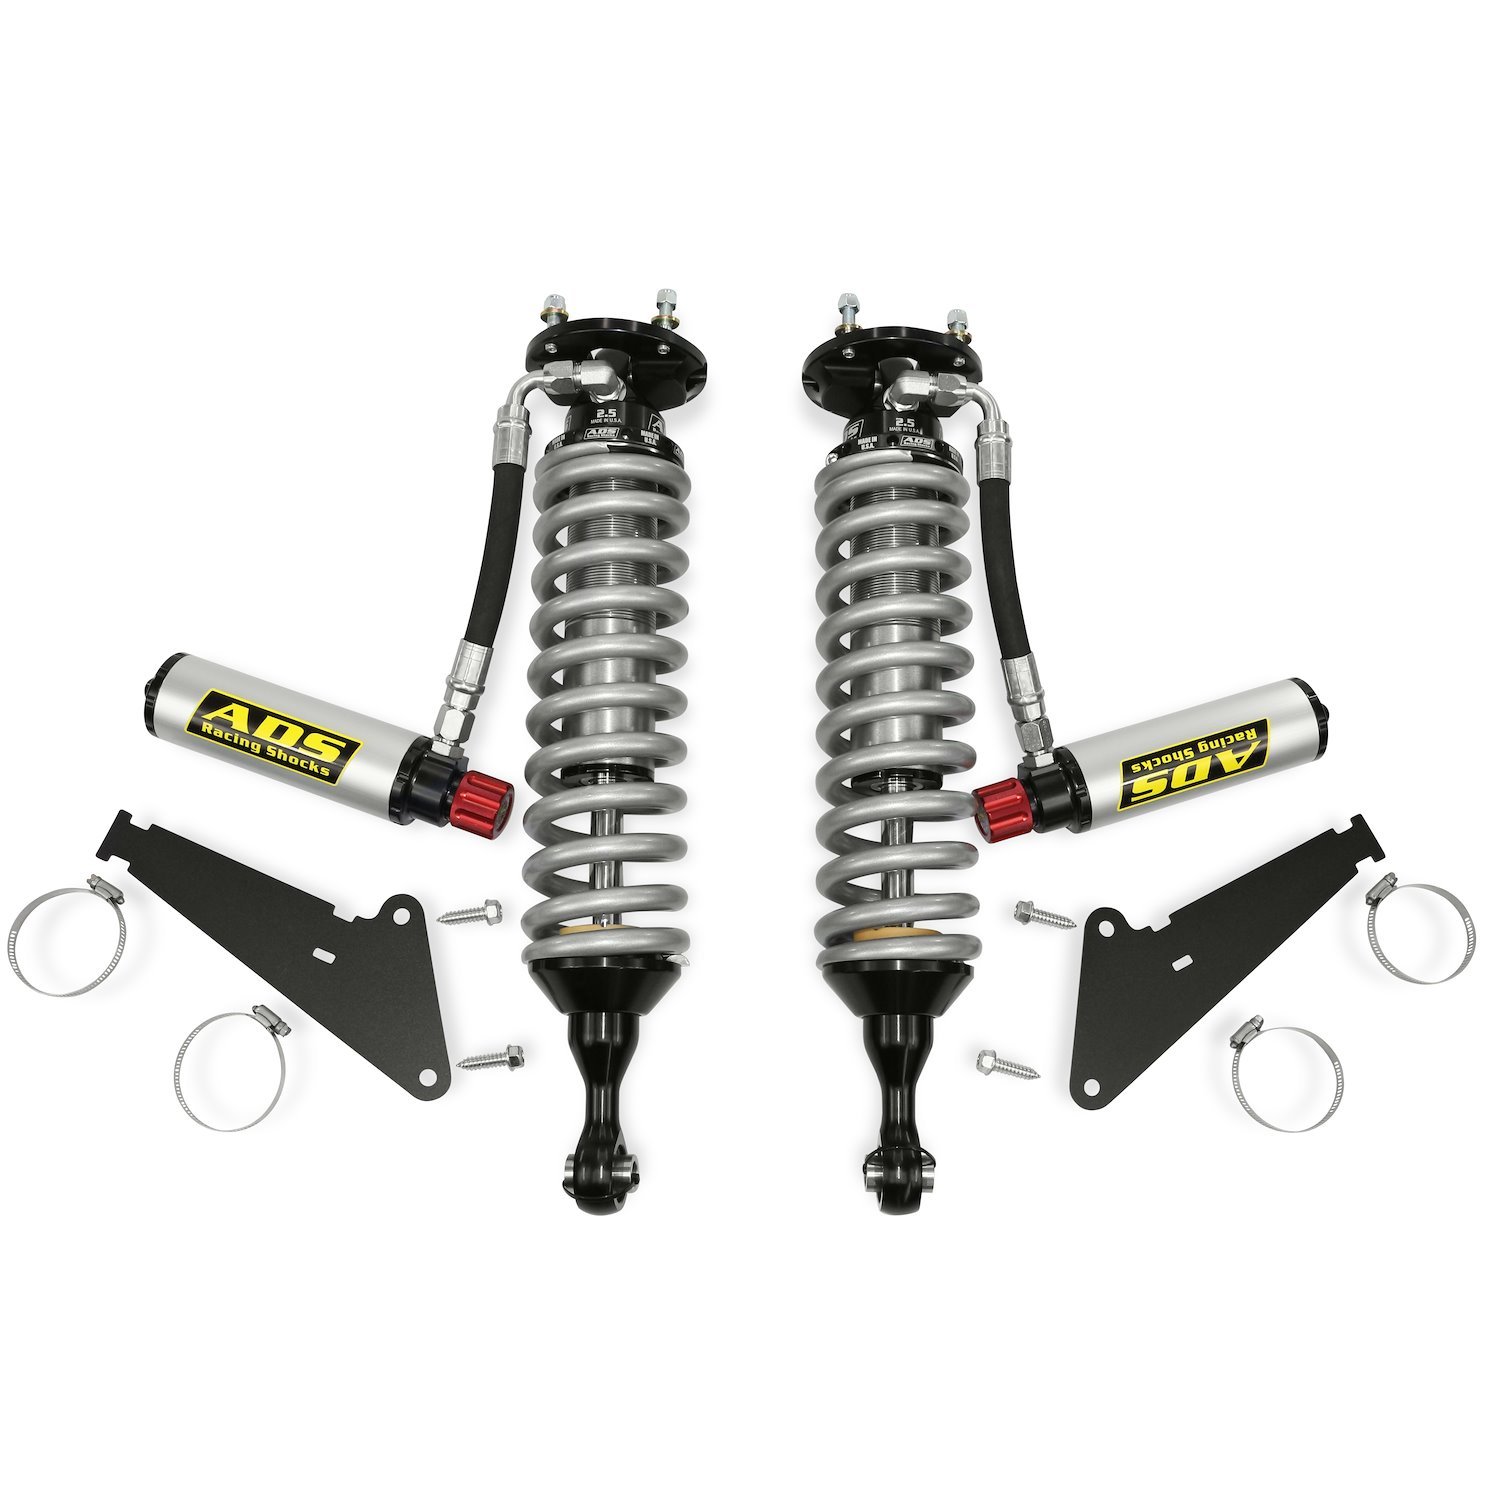 250-TN220-060 Racing Bolt-On Shocks, Fits Select Toyota Tundra, Toyota Sequoia, 2.5 in., w/ Remote Reservoir